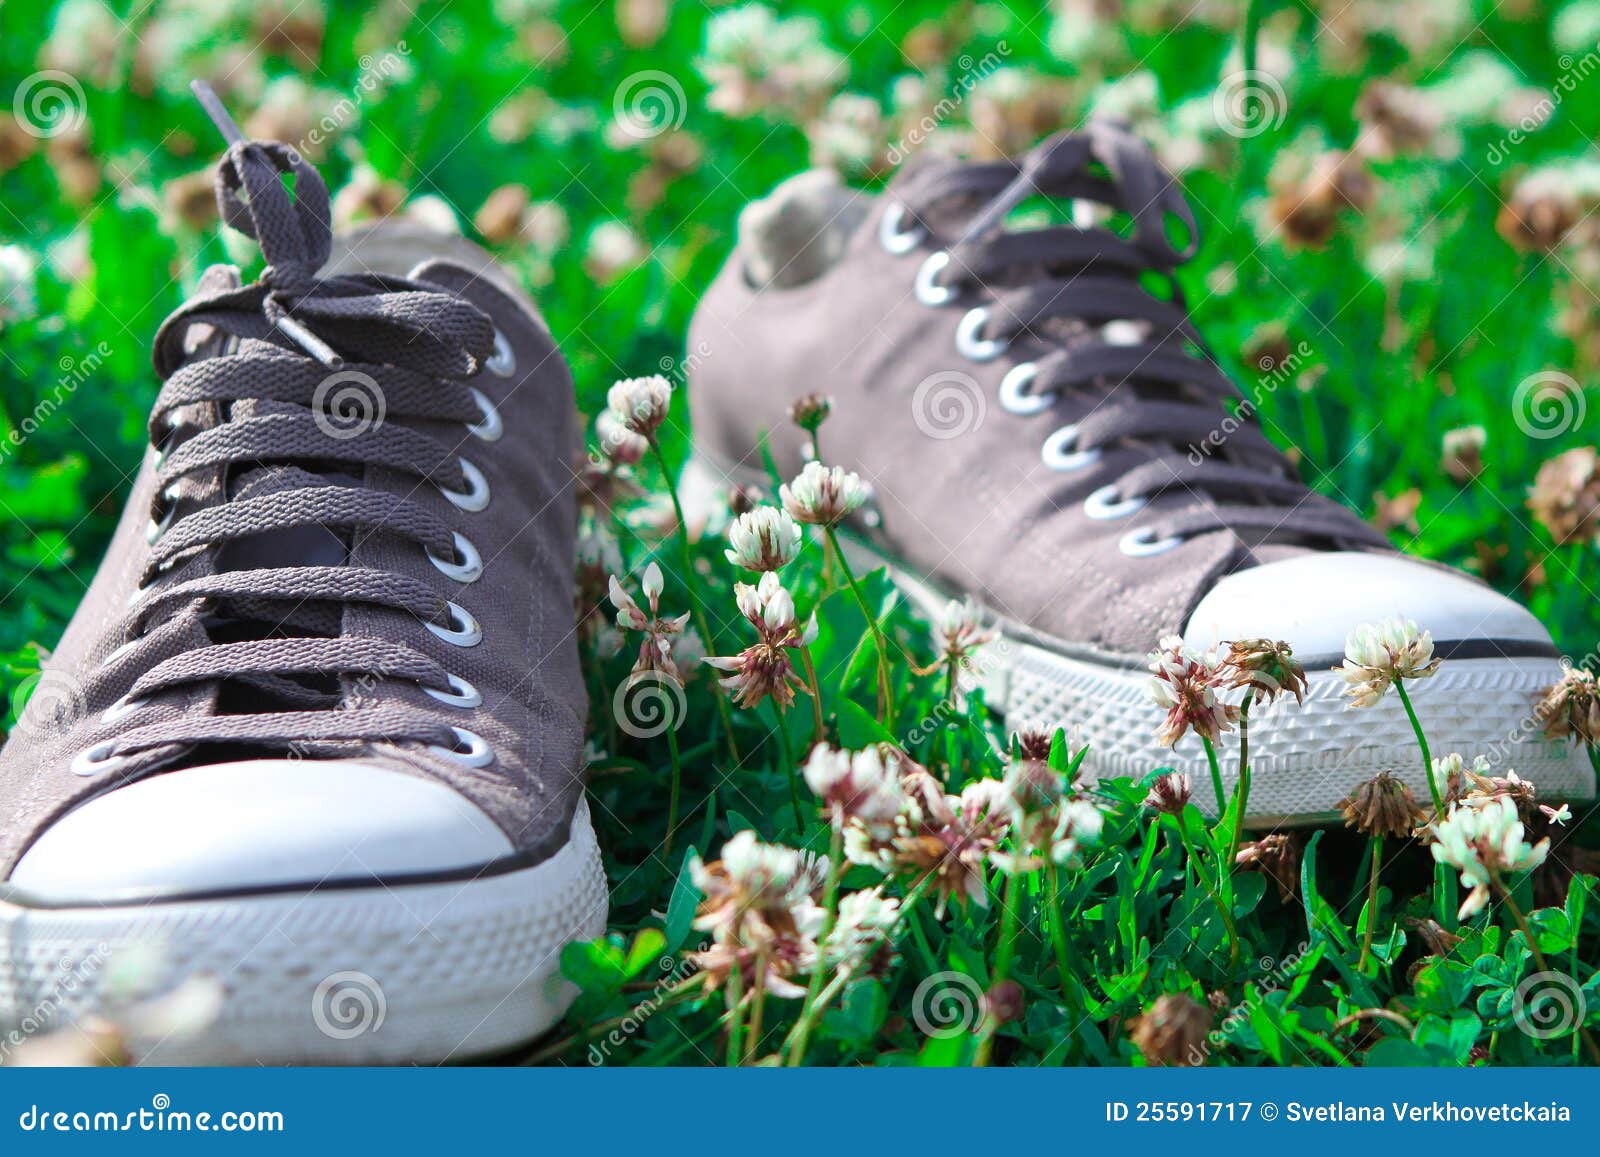 Sneakers on grass stock image. Image of pair, green, teenagers - 25591717